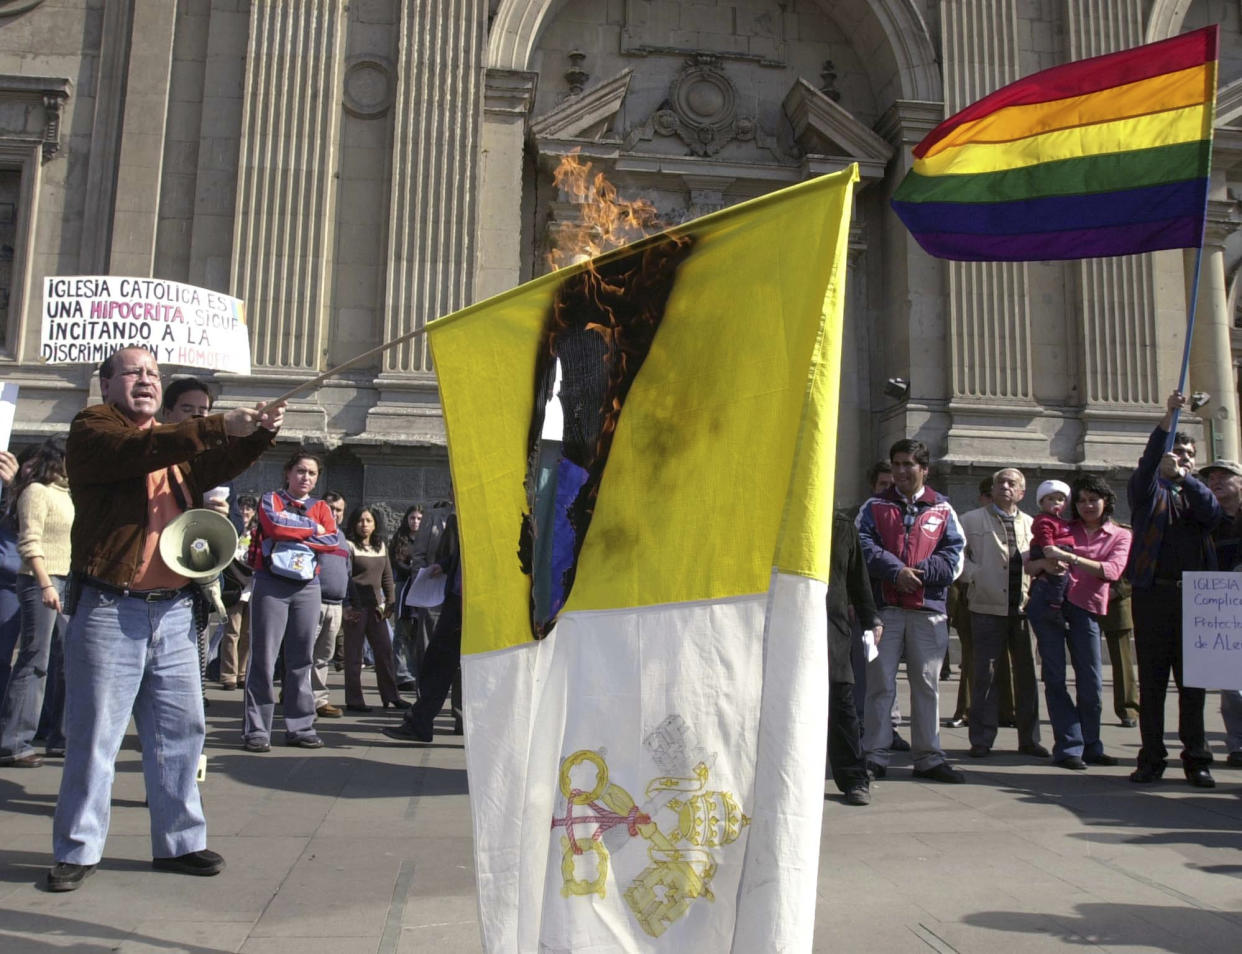 FILE - Rolando Jimenez, leader of a Chilean gay rights organization, holds a flaming Vatican flag during a protest by gay activists against the Roman Catholic Church's rejection of same-sex marriages, in front of a cathedral in Santiago, Chile, in this Friday, Aug. 15, 2003 file photo. In an interview with The Associated Press at The Vatican, Tuesday, Jan. 24, 2023, Pope Francis acknowledged that Catholic bishops in some parts of the world support laws that criminalize homosexuality or discriminate against the LGBTQ community, and he himself referred to homosexuality in terms of "sin." But he attributed attitudes to cultural backgrounds and said bishops in particular need to undergo a process of change to recognize the dignity of everyone. (AP Photo/Santiago Llanquin)